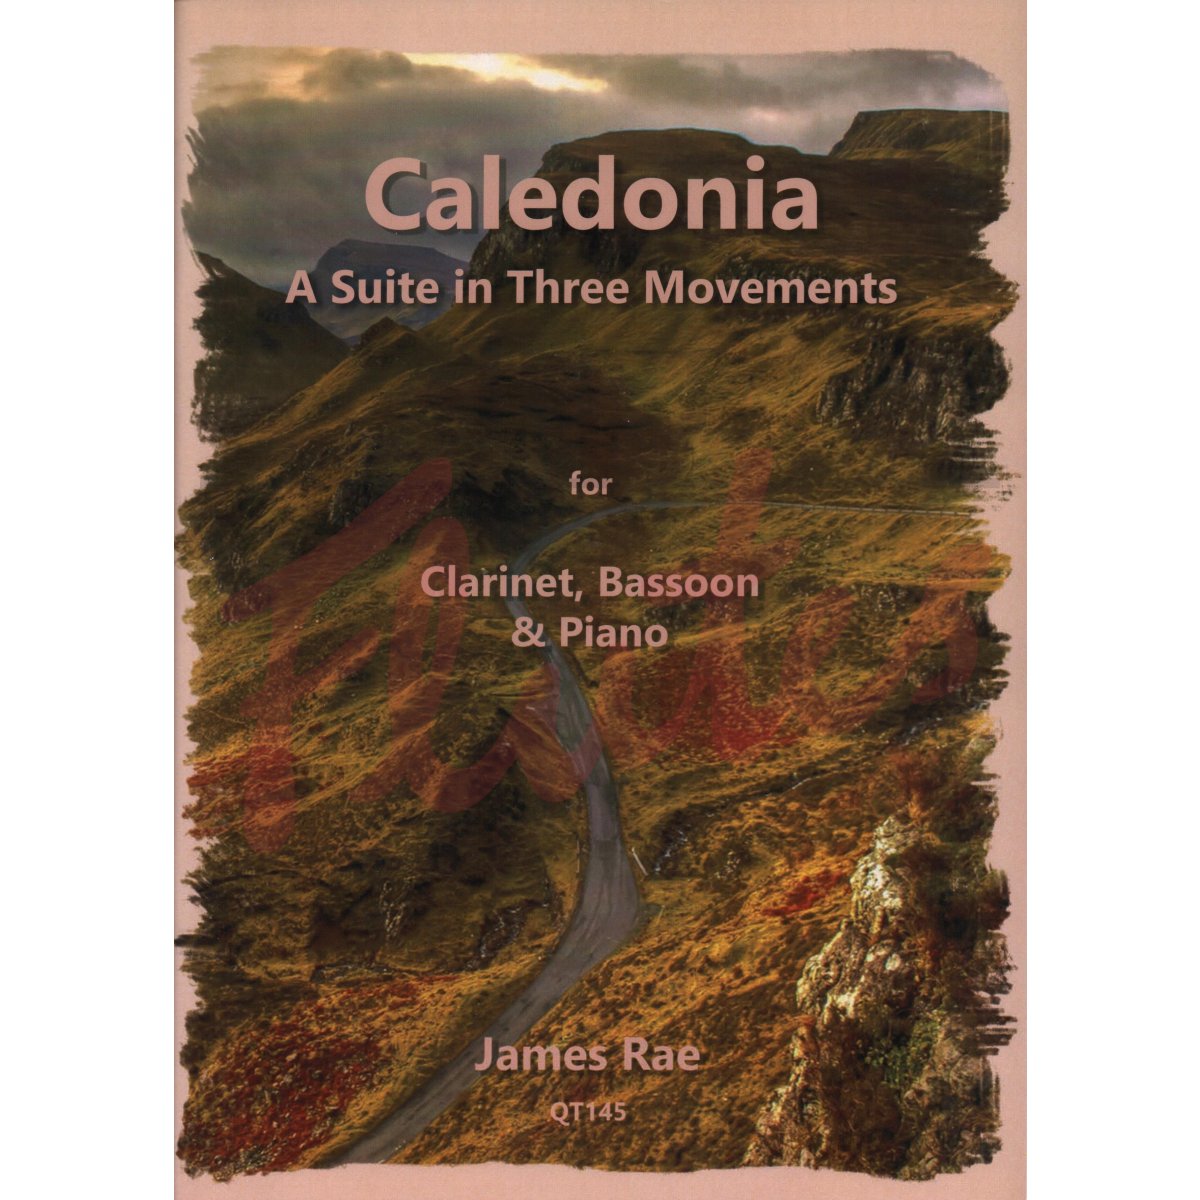 Caledonia - A Suite in Three Movements for Clarinet, Bassoon and Piano